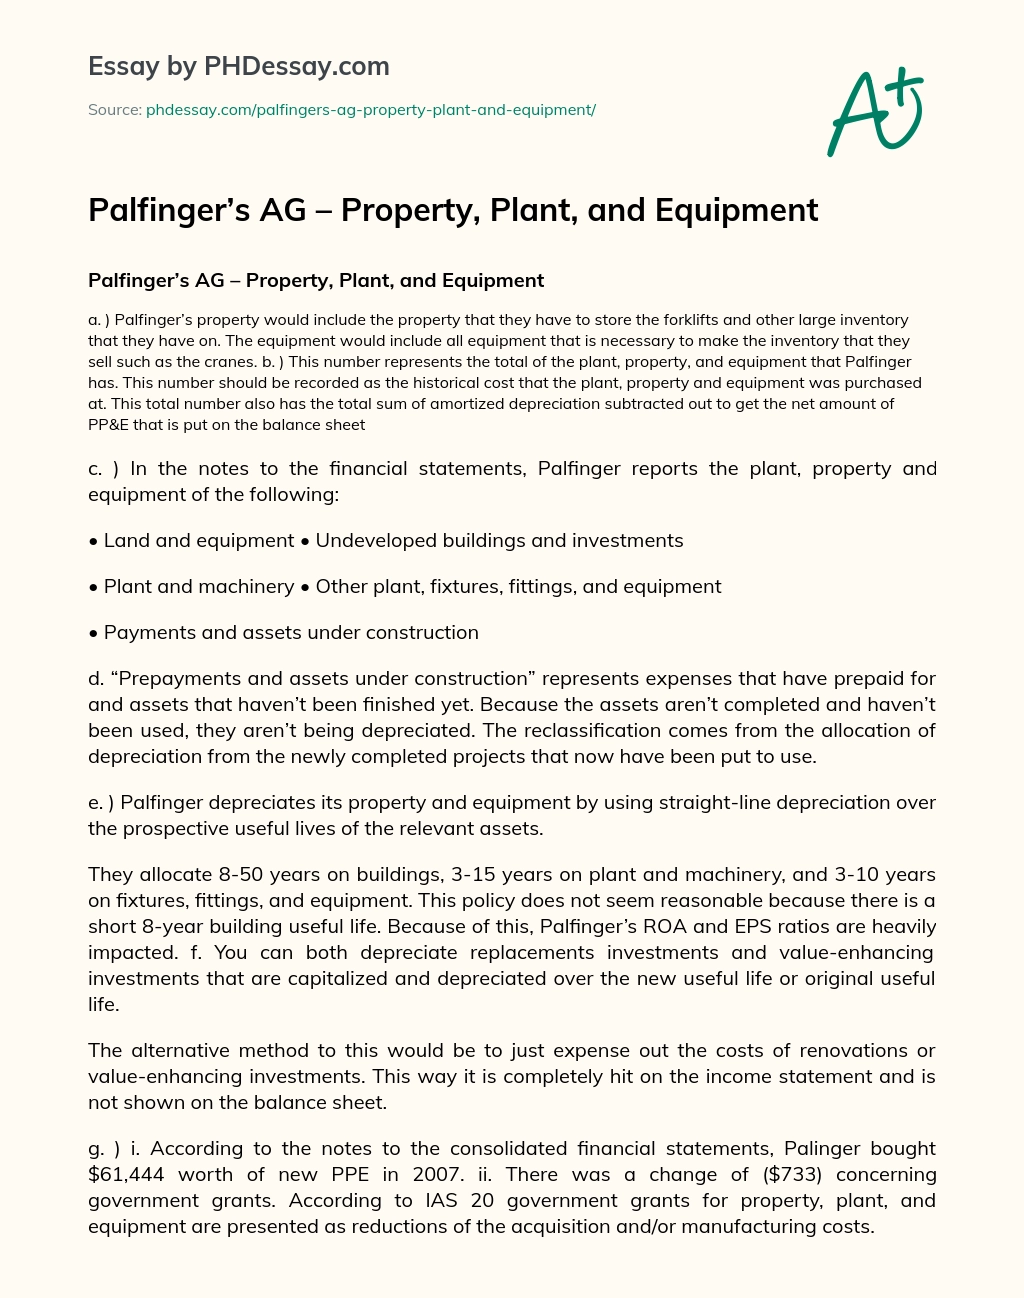 Palfinger’s AG – Property, Plant, and Equipment essay